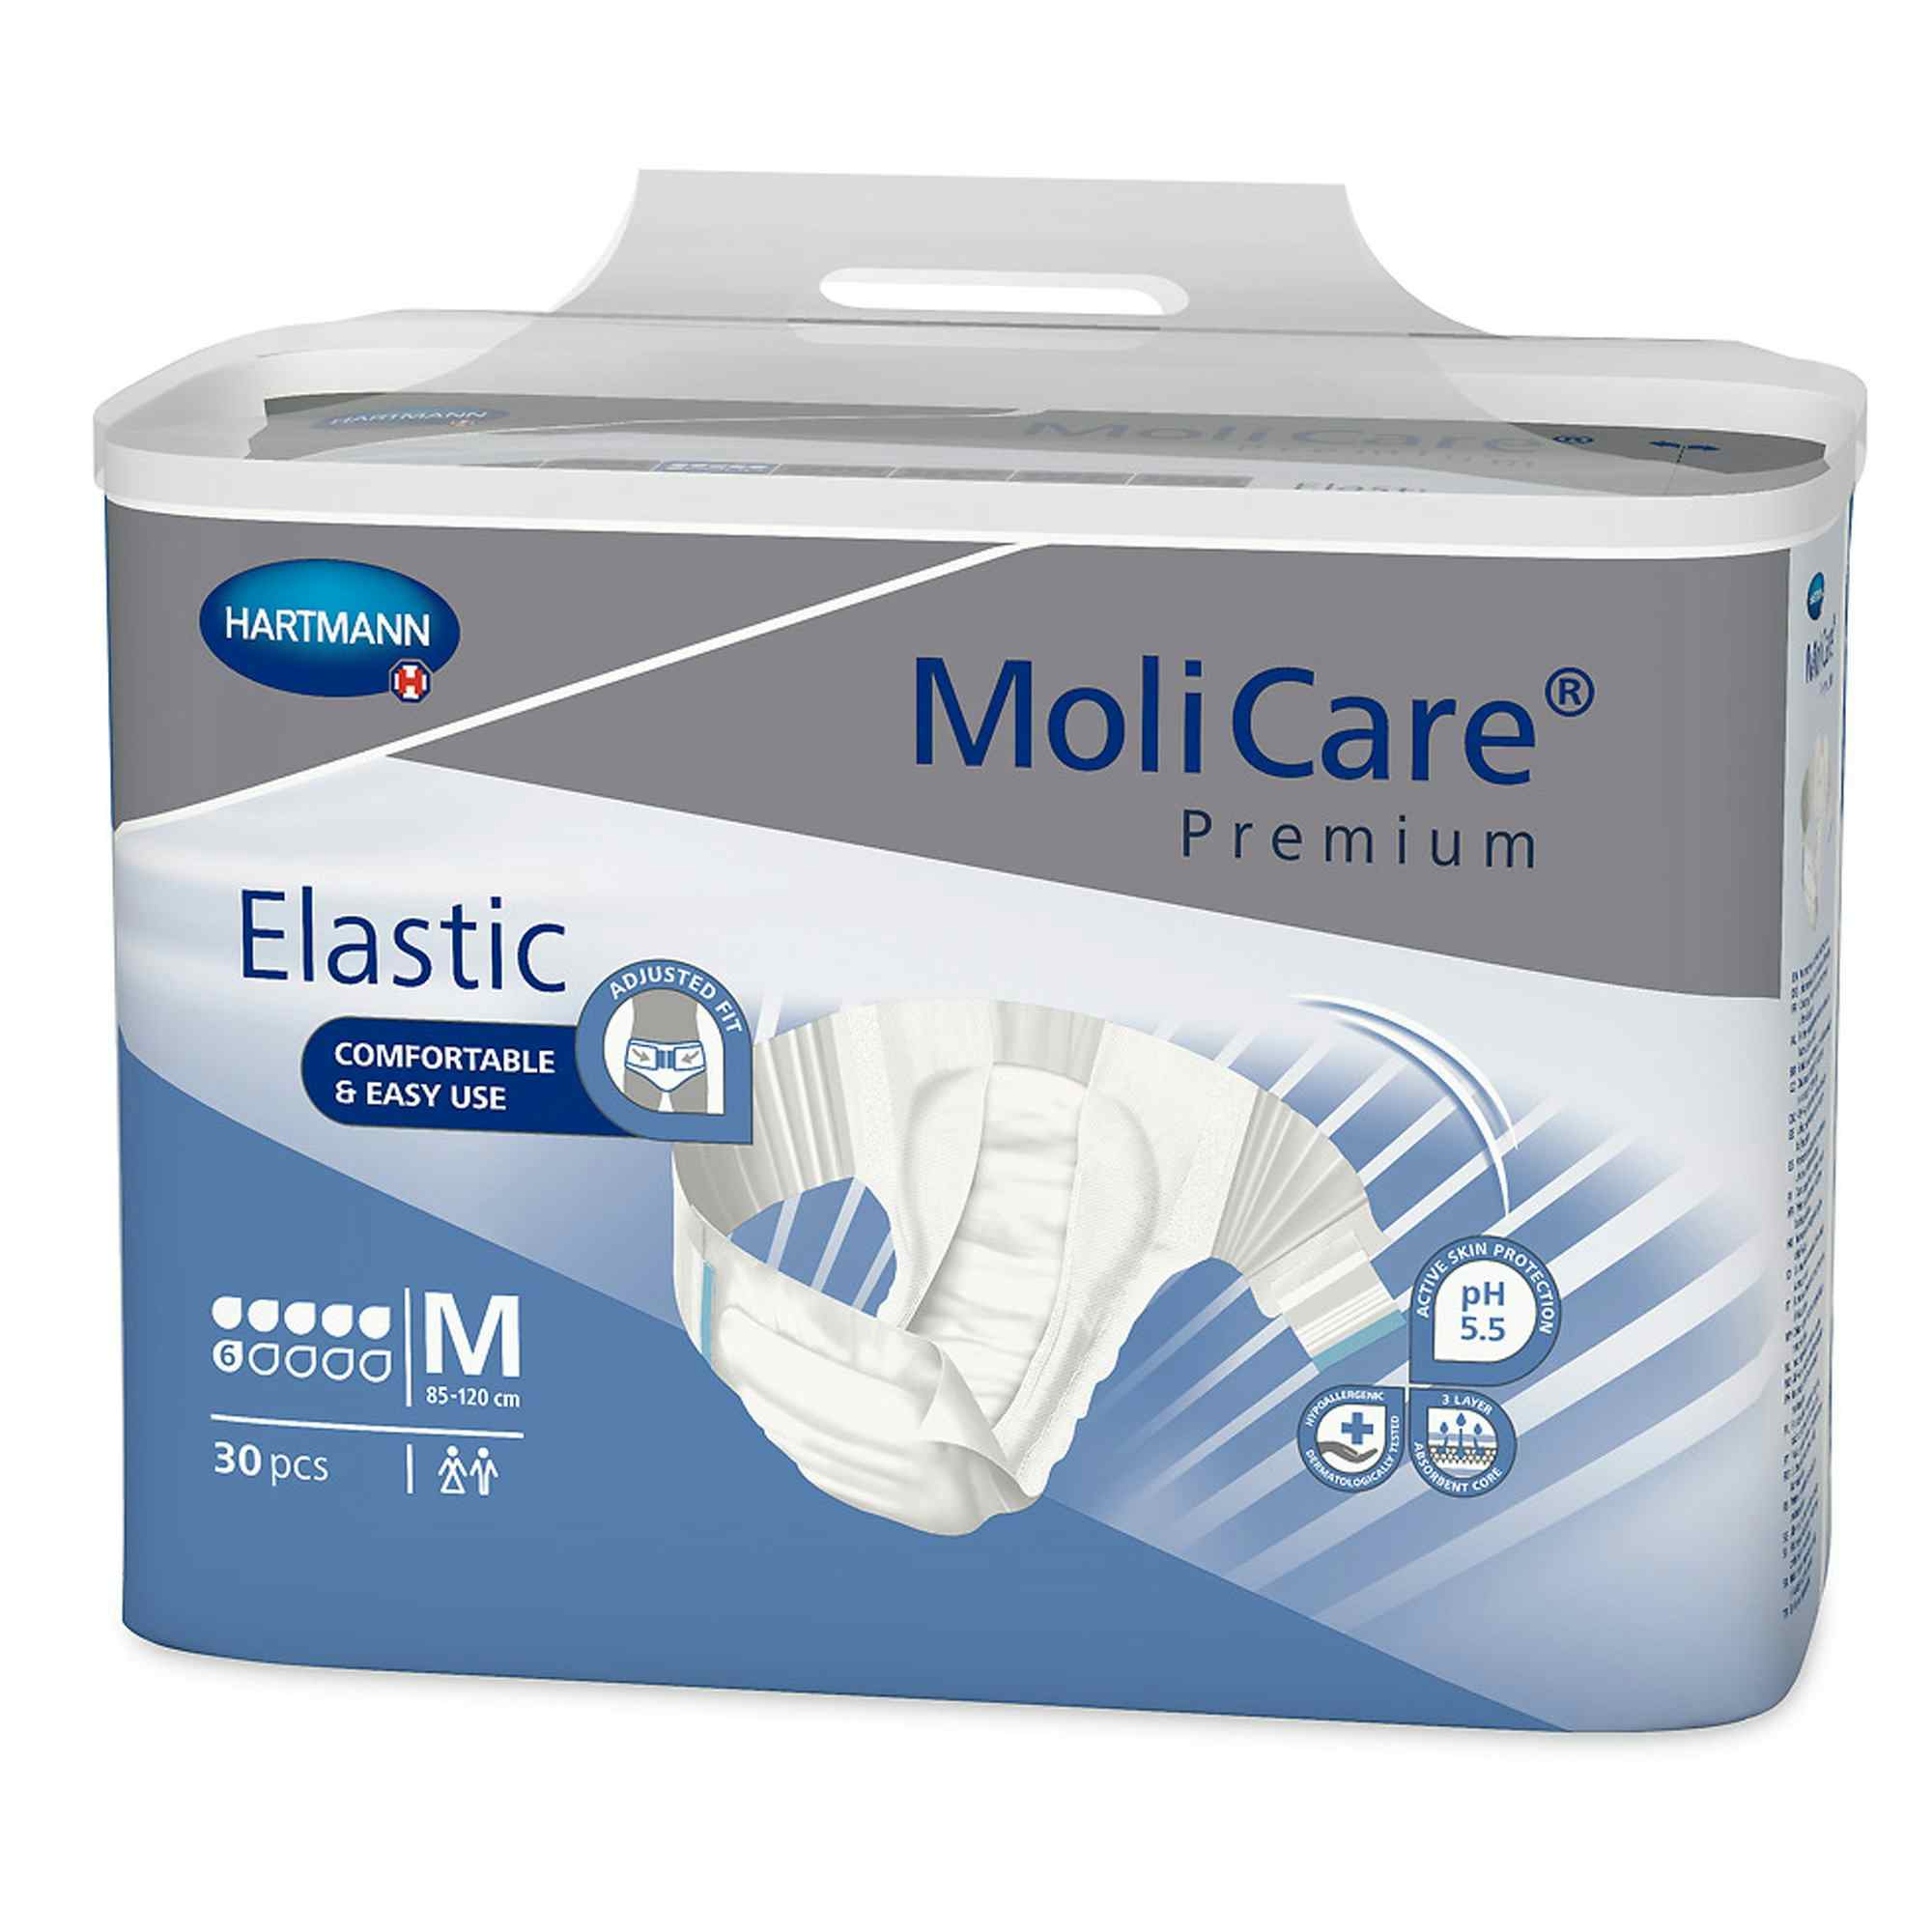 MoliCare Premium Elastic 6D Disposable Brief Adult Diapers with Tabs, Moderate Absorbency, 165272, Medium (33-47") - Case of 90